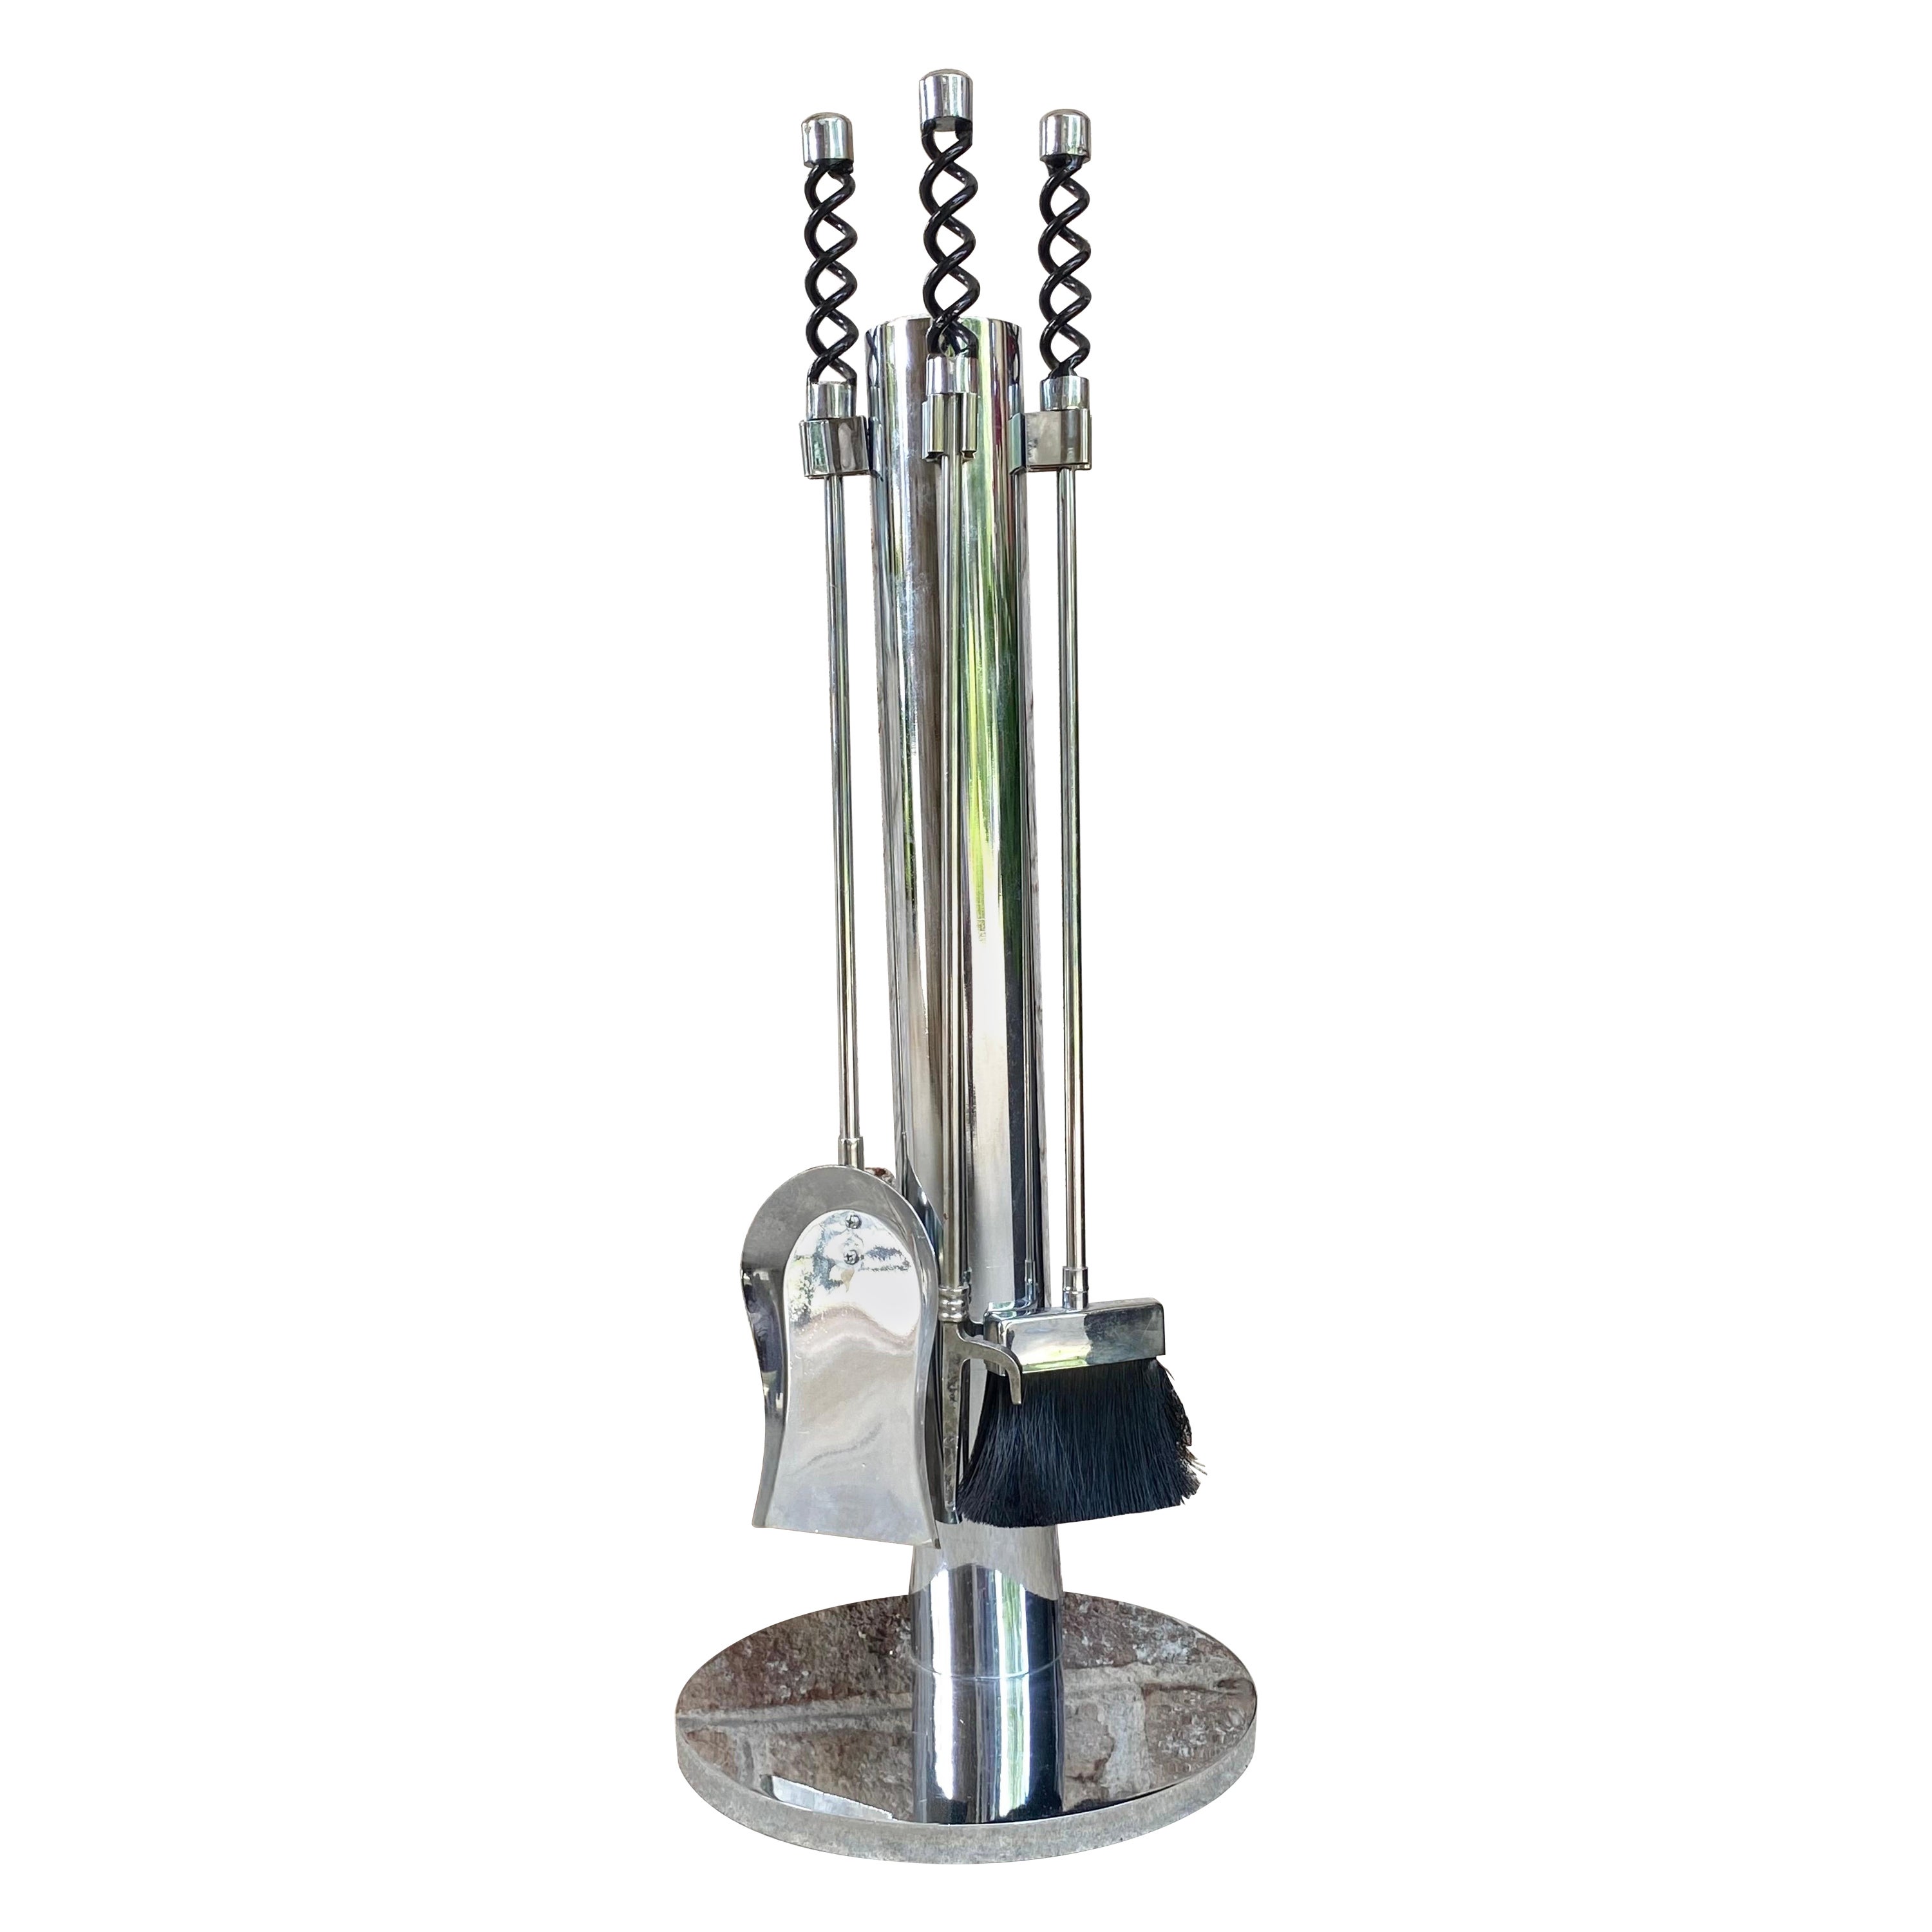 Modernist Chrome Fireplace Tools with Spring Handles